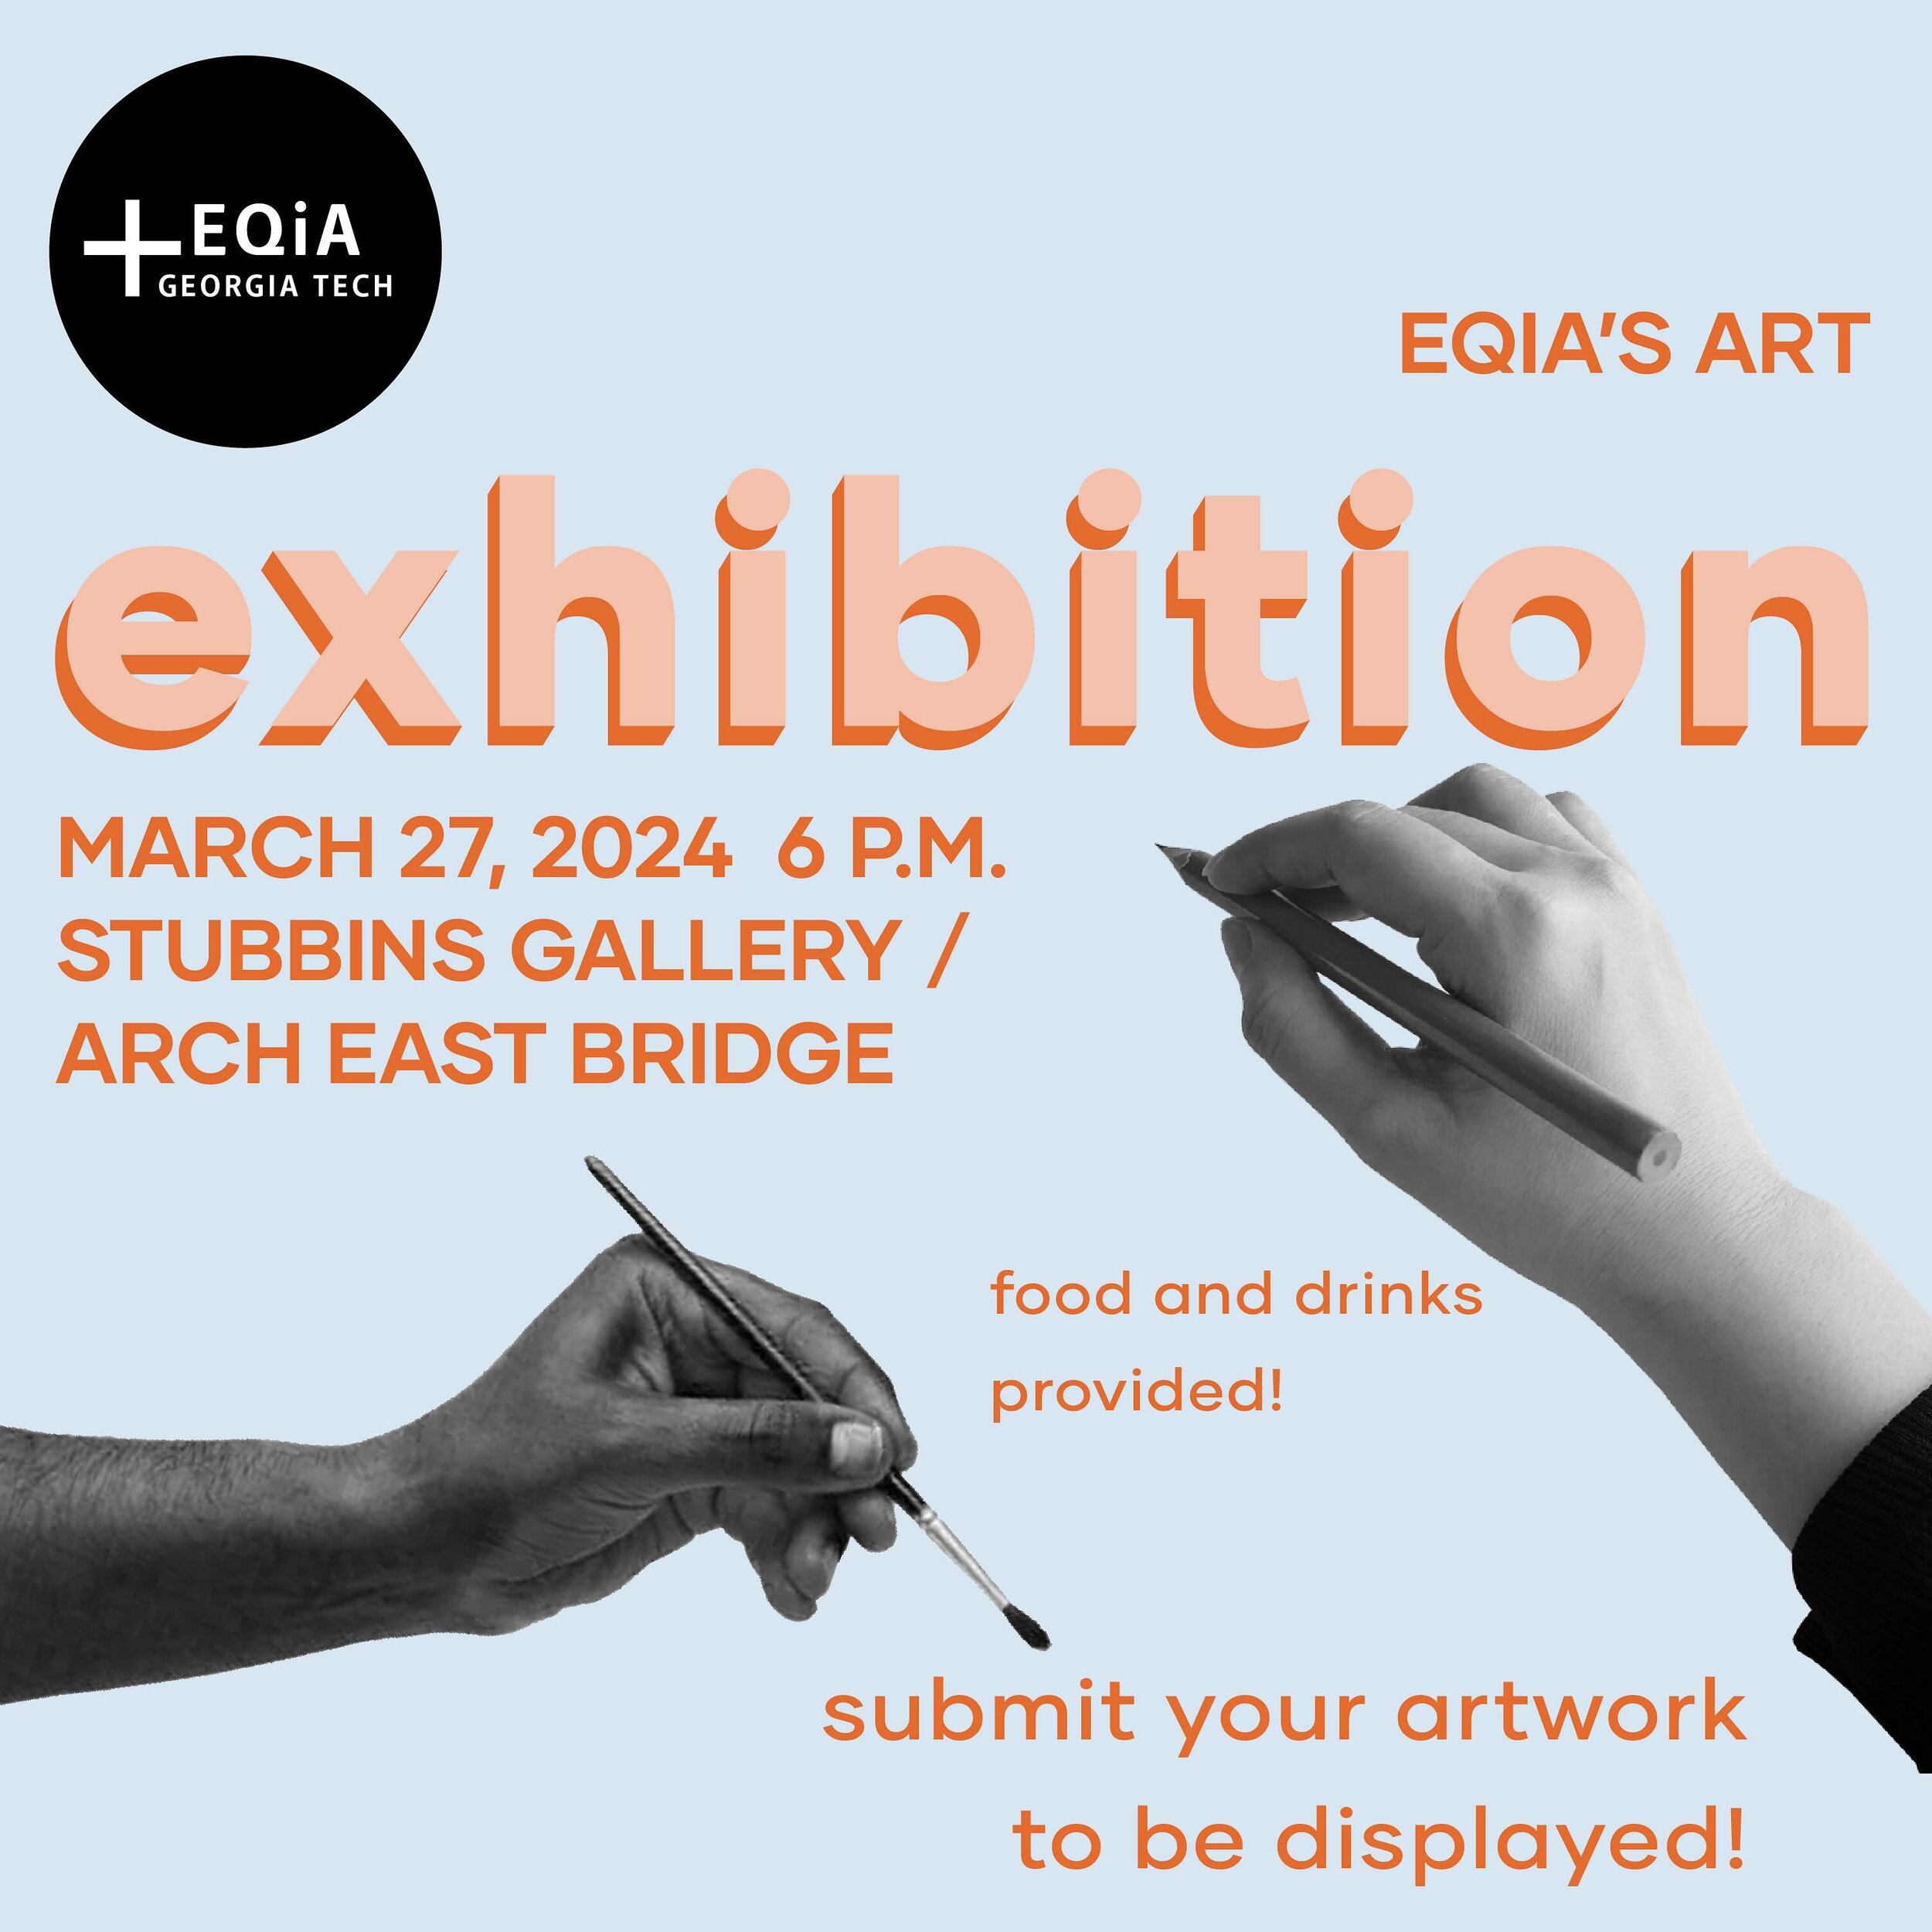 Submit your artwork for our annual exhibition at the link in our bio! This exciting event is an opportunity for students to showcase their work and talent, and the exhibition will open after our forum discussion!